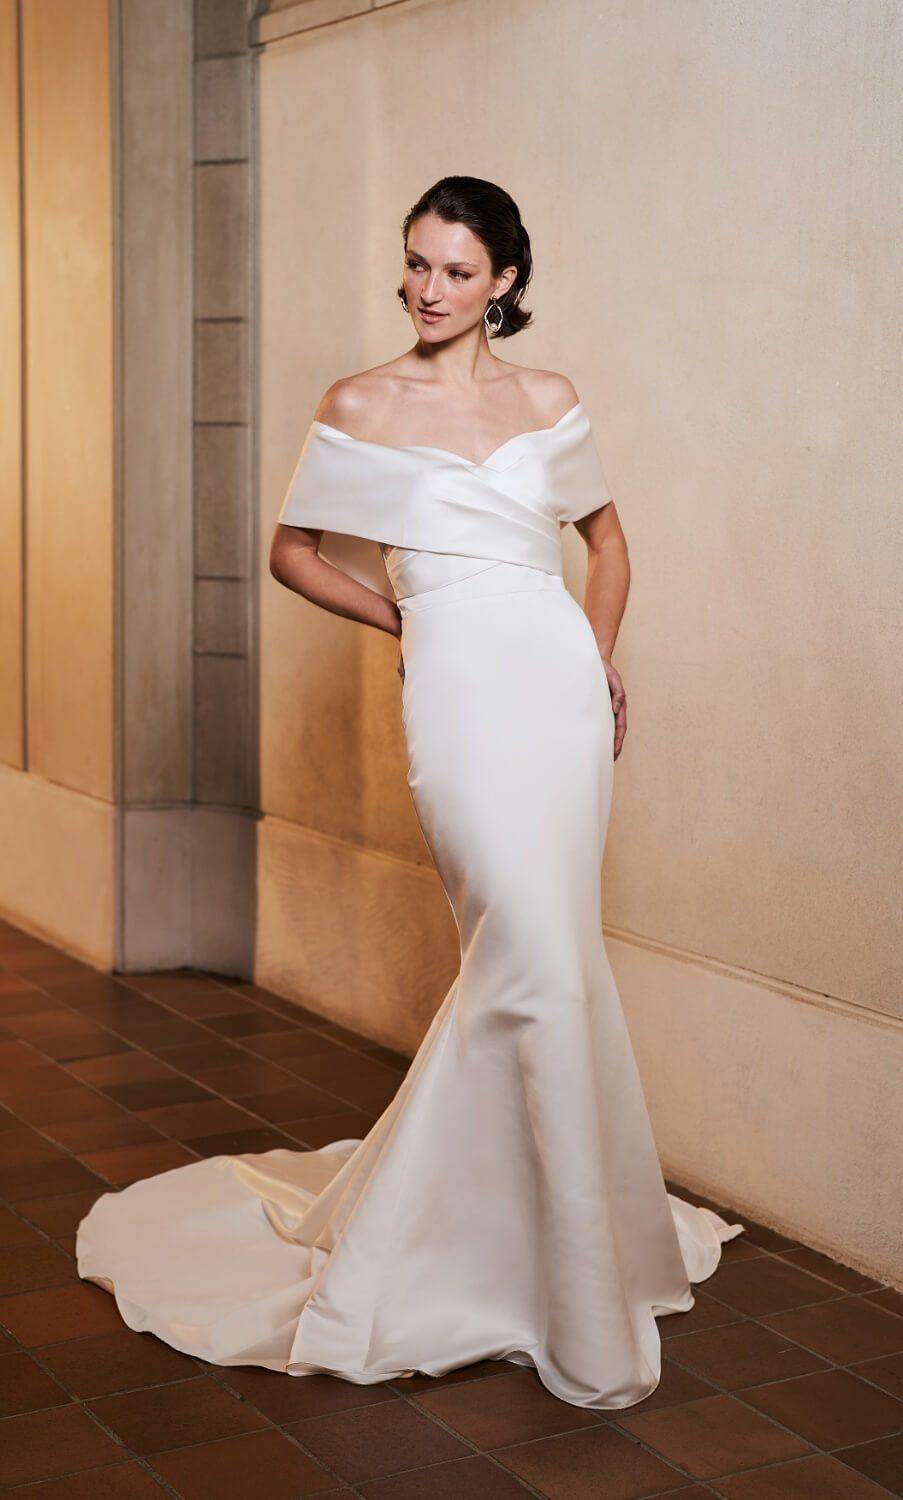 Model wearing fitted Serenity wedding dress with off shoulder sleeves from the Royal collection